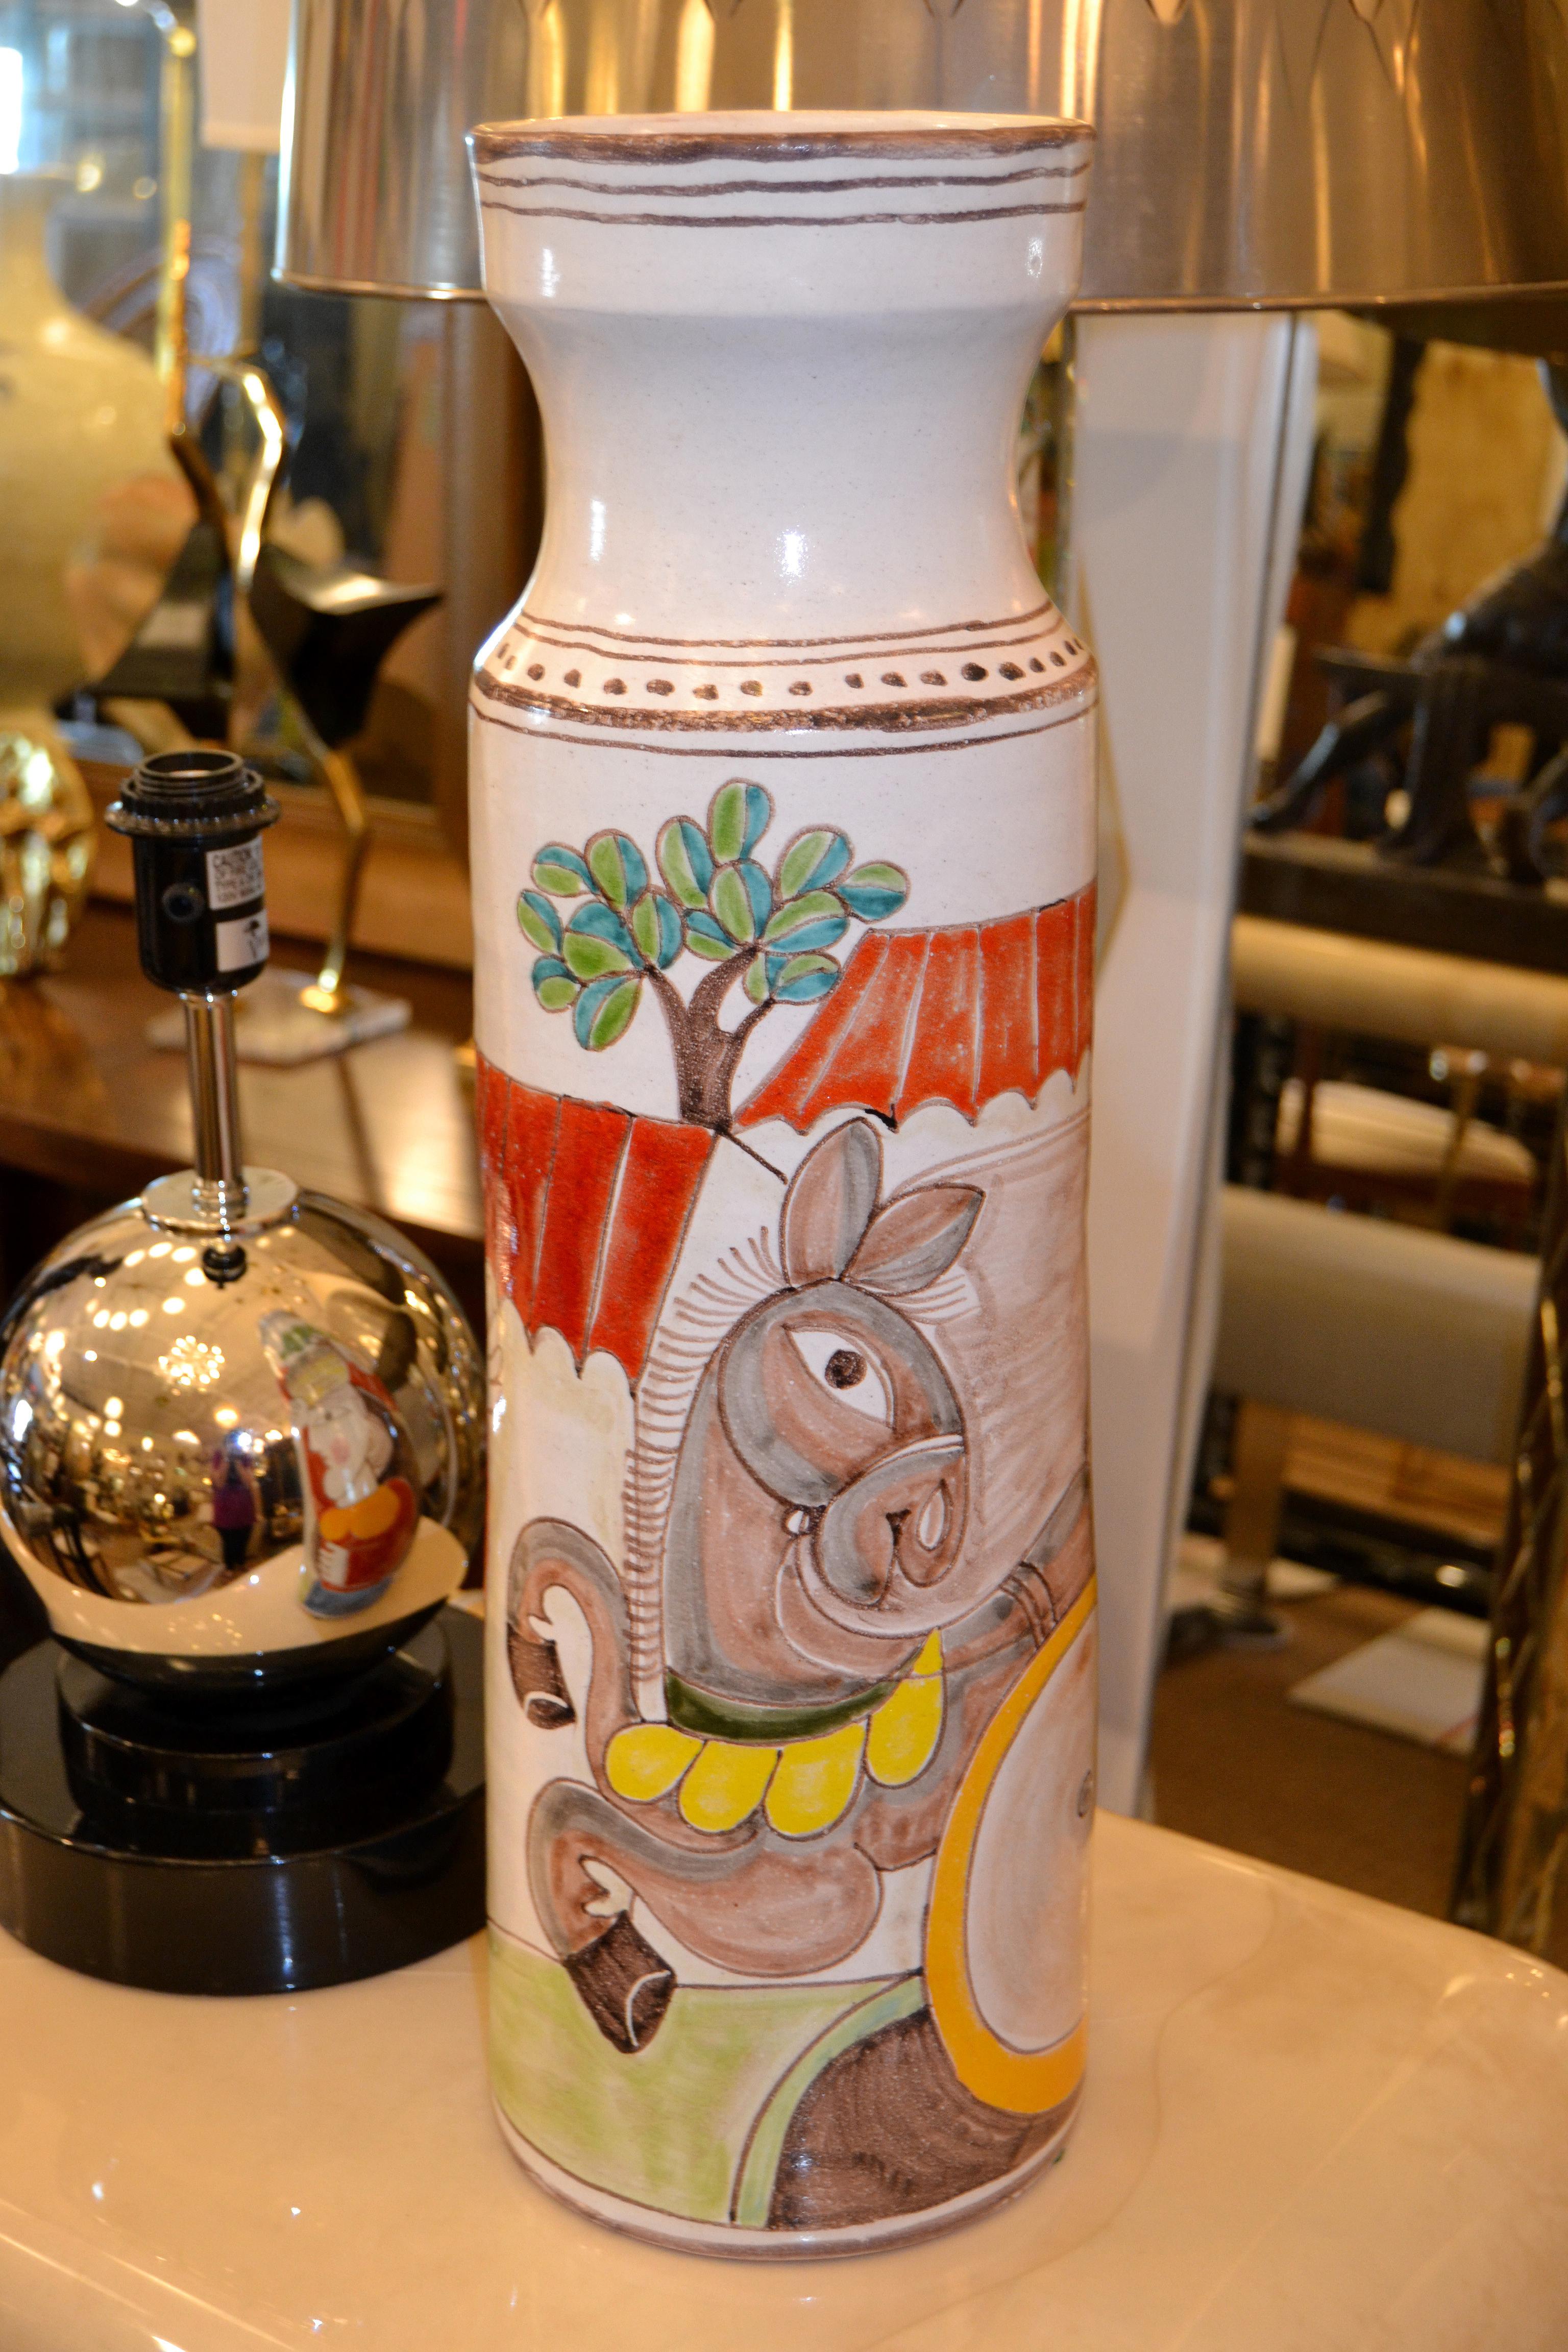 Original Italian Giovanni Desimone hand painted tall art pottery flower vase, vessel.
The glazed vase painting depicts a man and a woman in action picking olives with a donkey.
Marked and numbered on underside, 'Desimone, Italy 13'.
THIS ITEM WILL